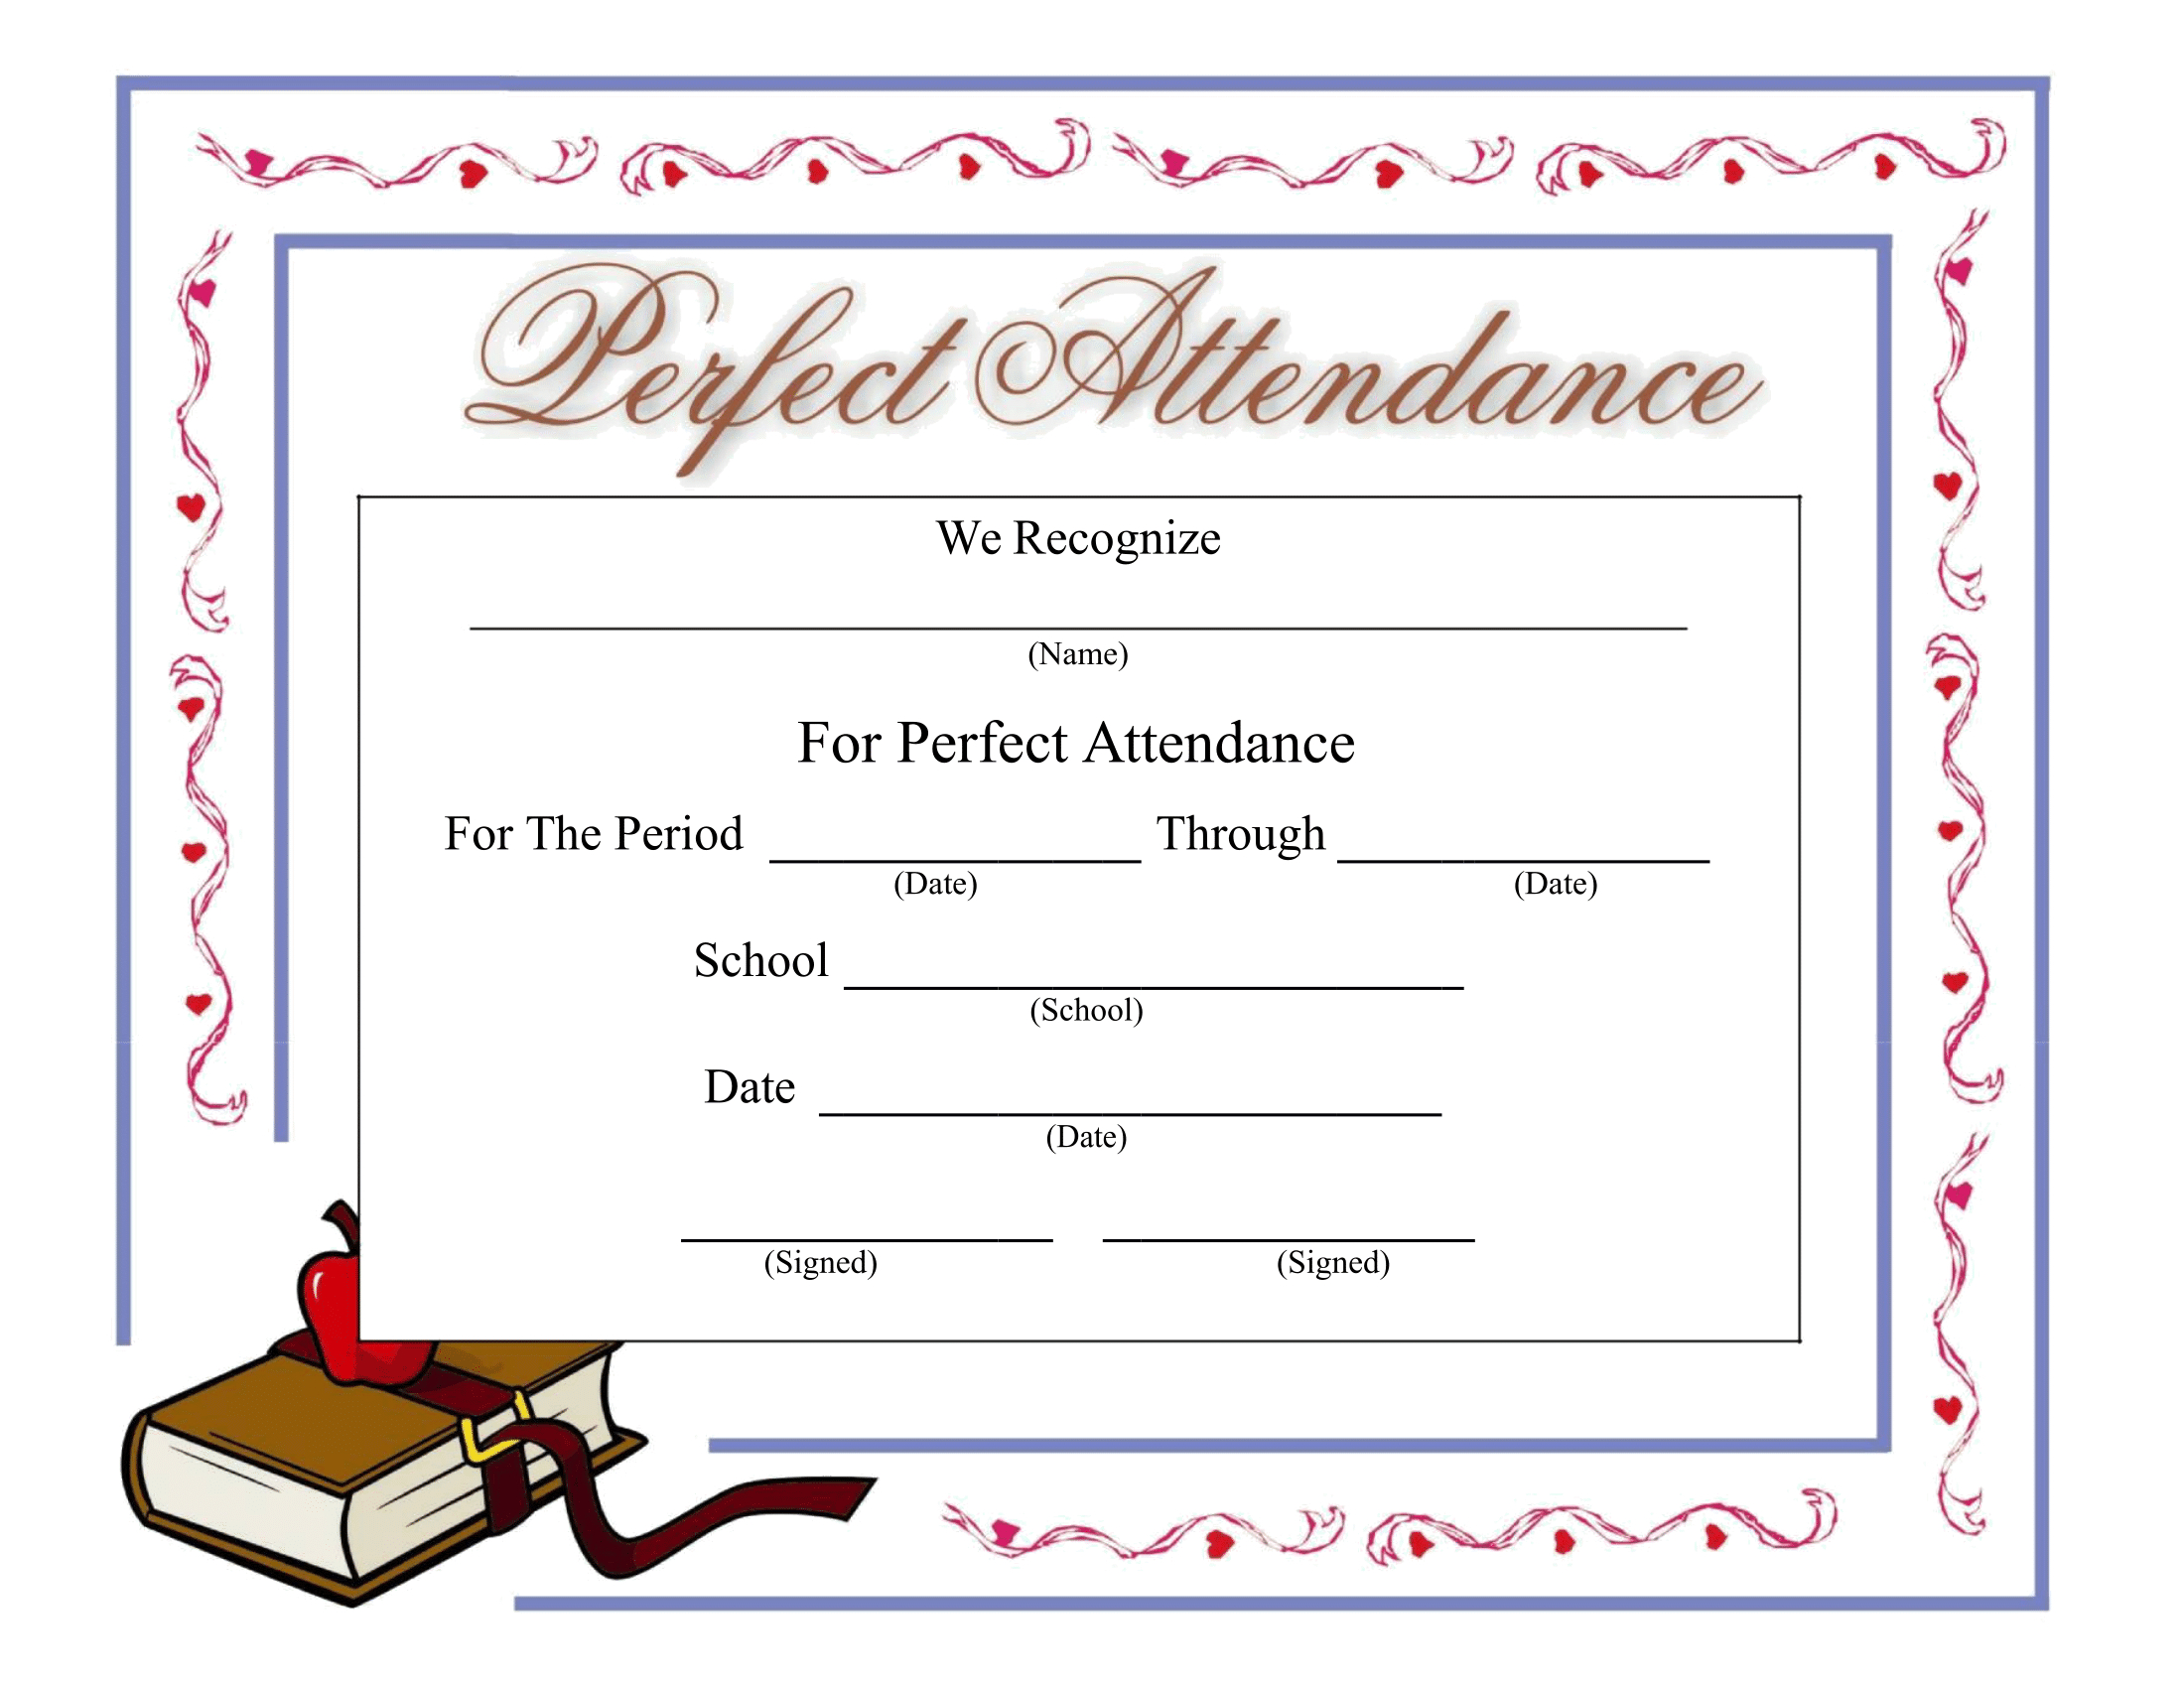 Perfect Attendance Certificate - Download A Free Template For Perfect Attendance Certificate Free Template